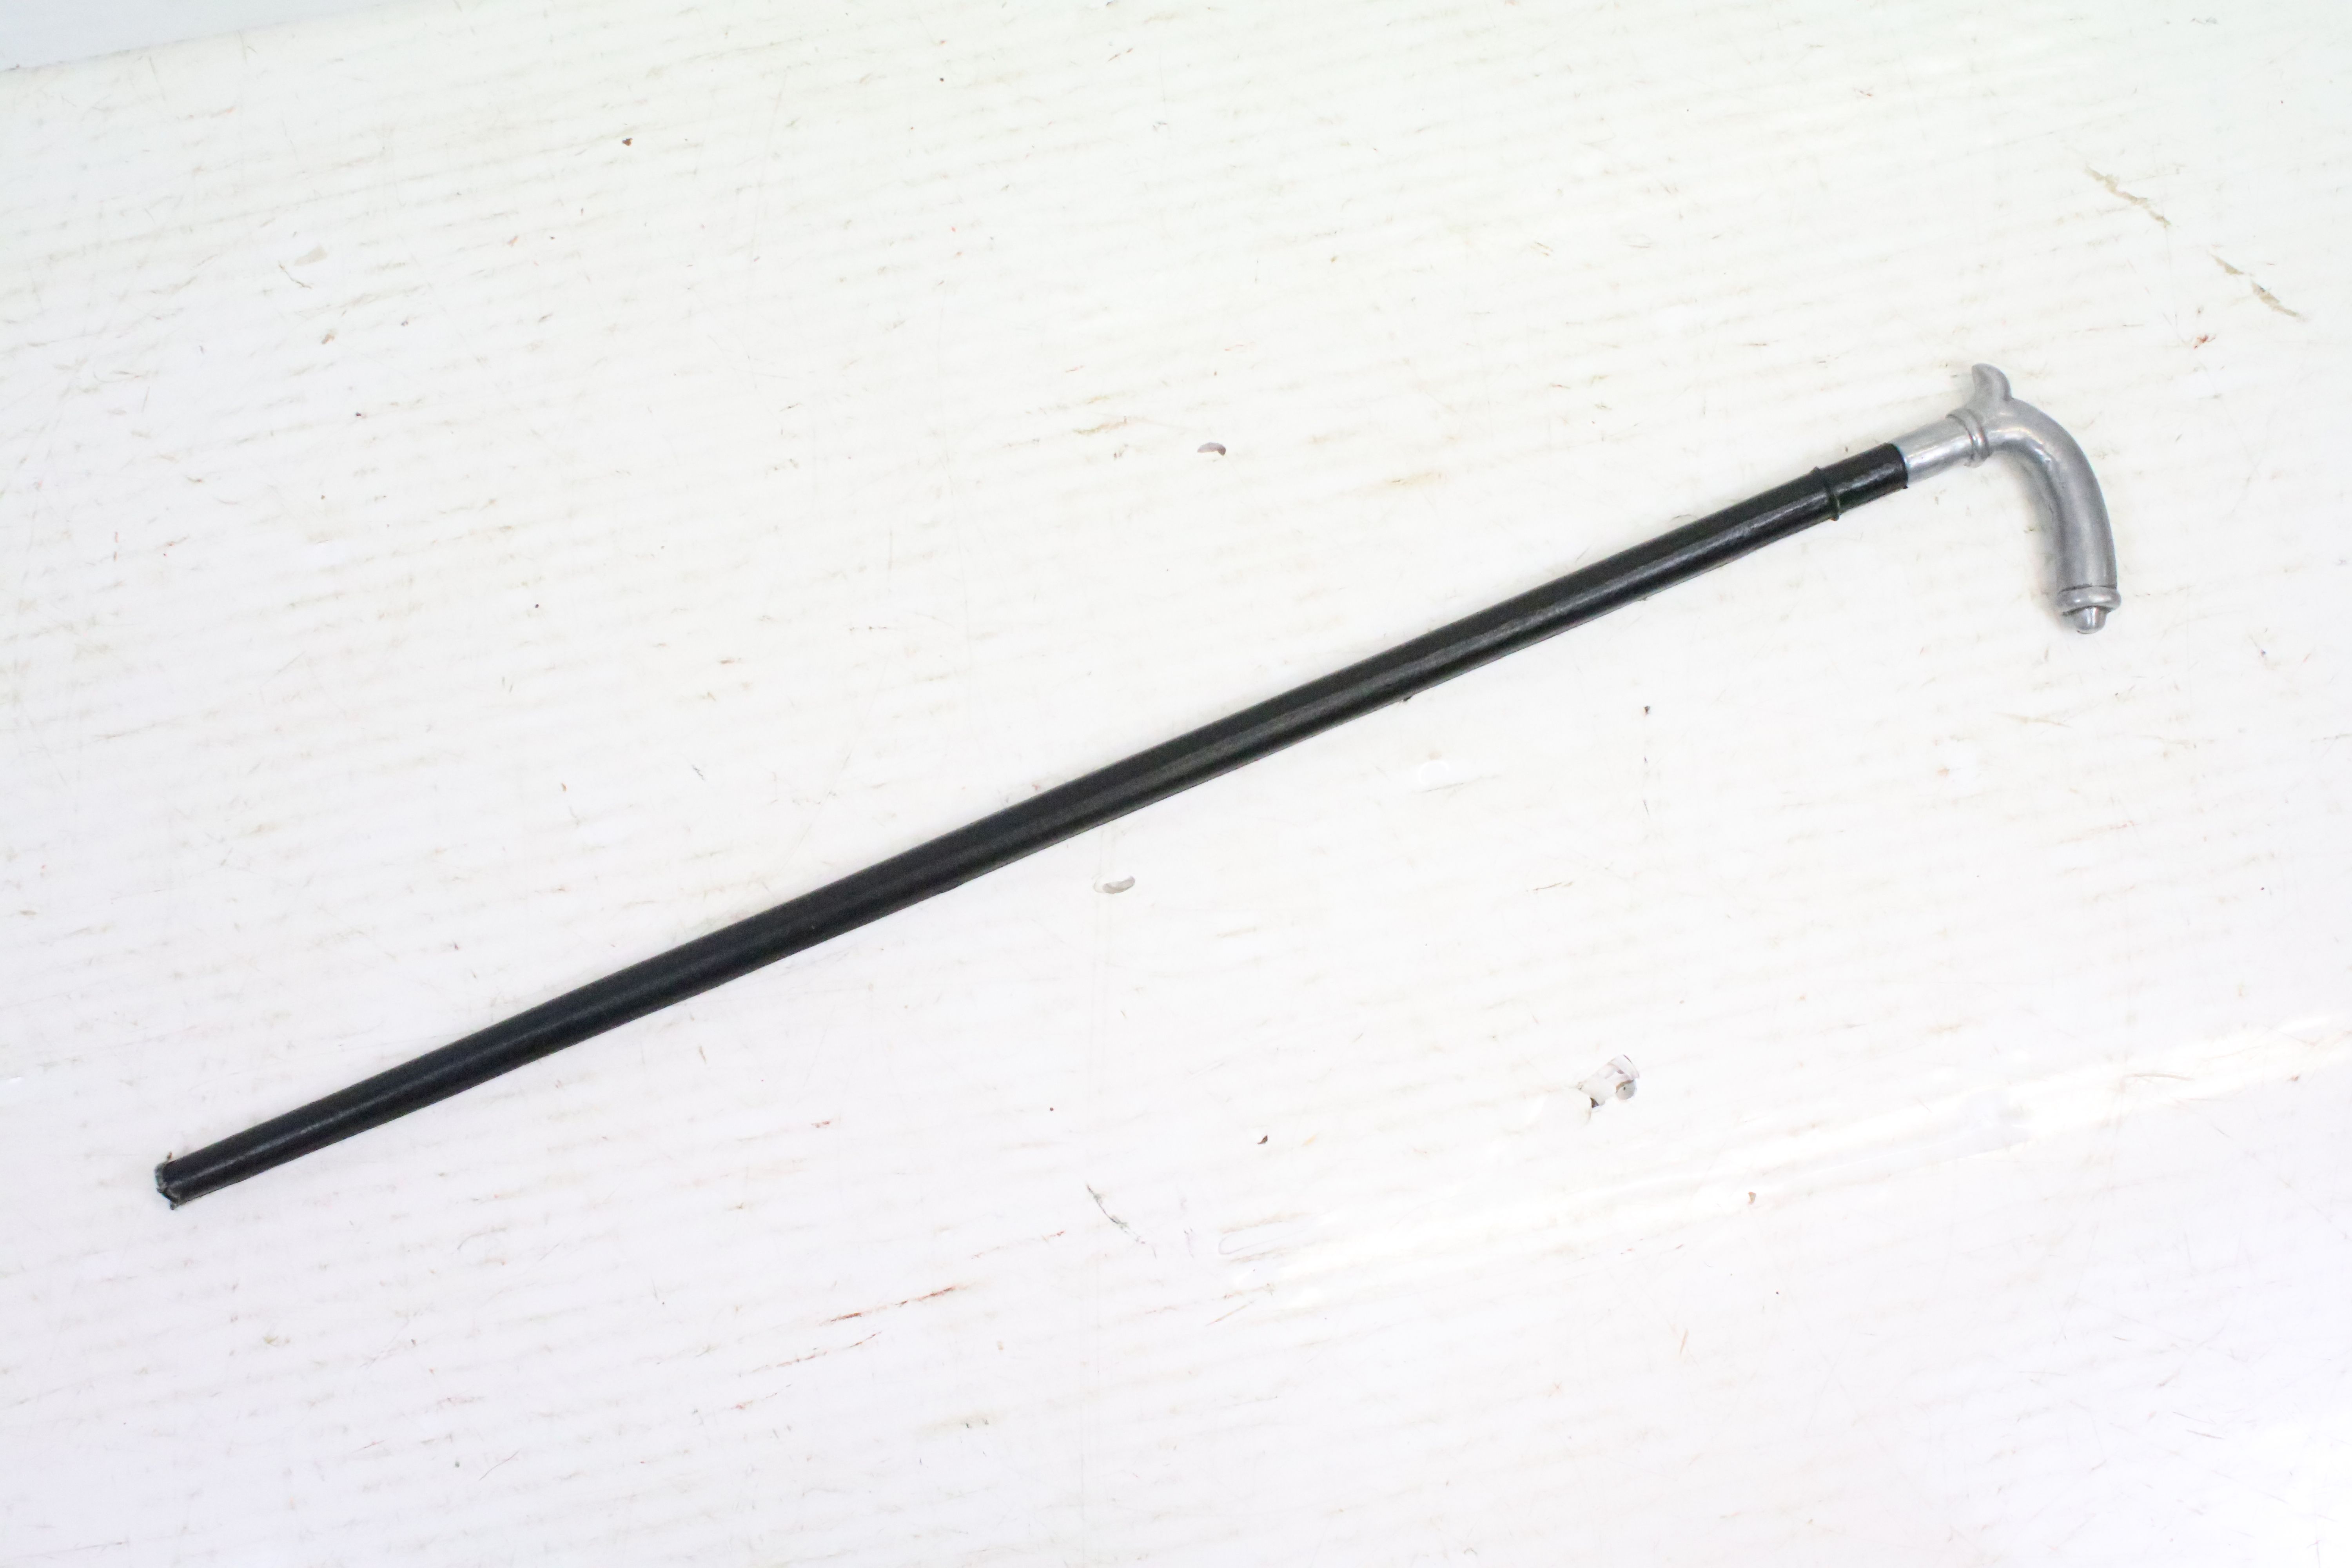 A vintage leather sword stick with aluminium handle. - Image 4 of 4